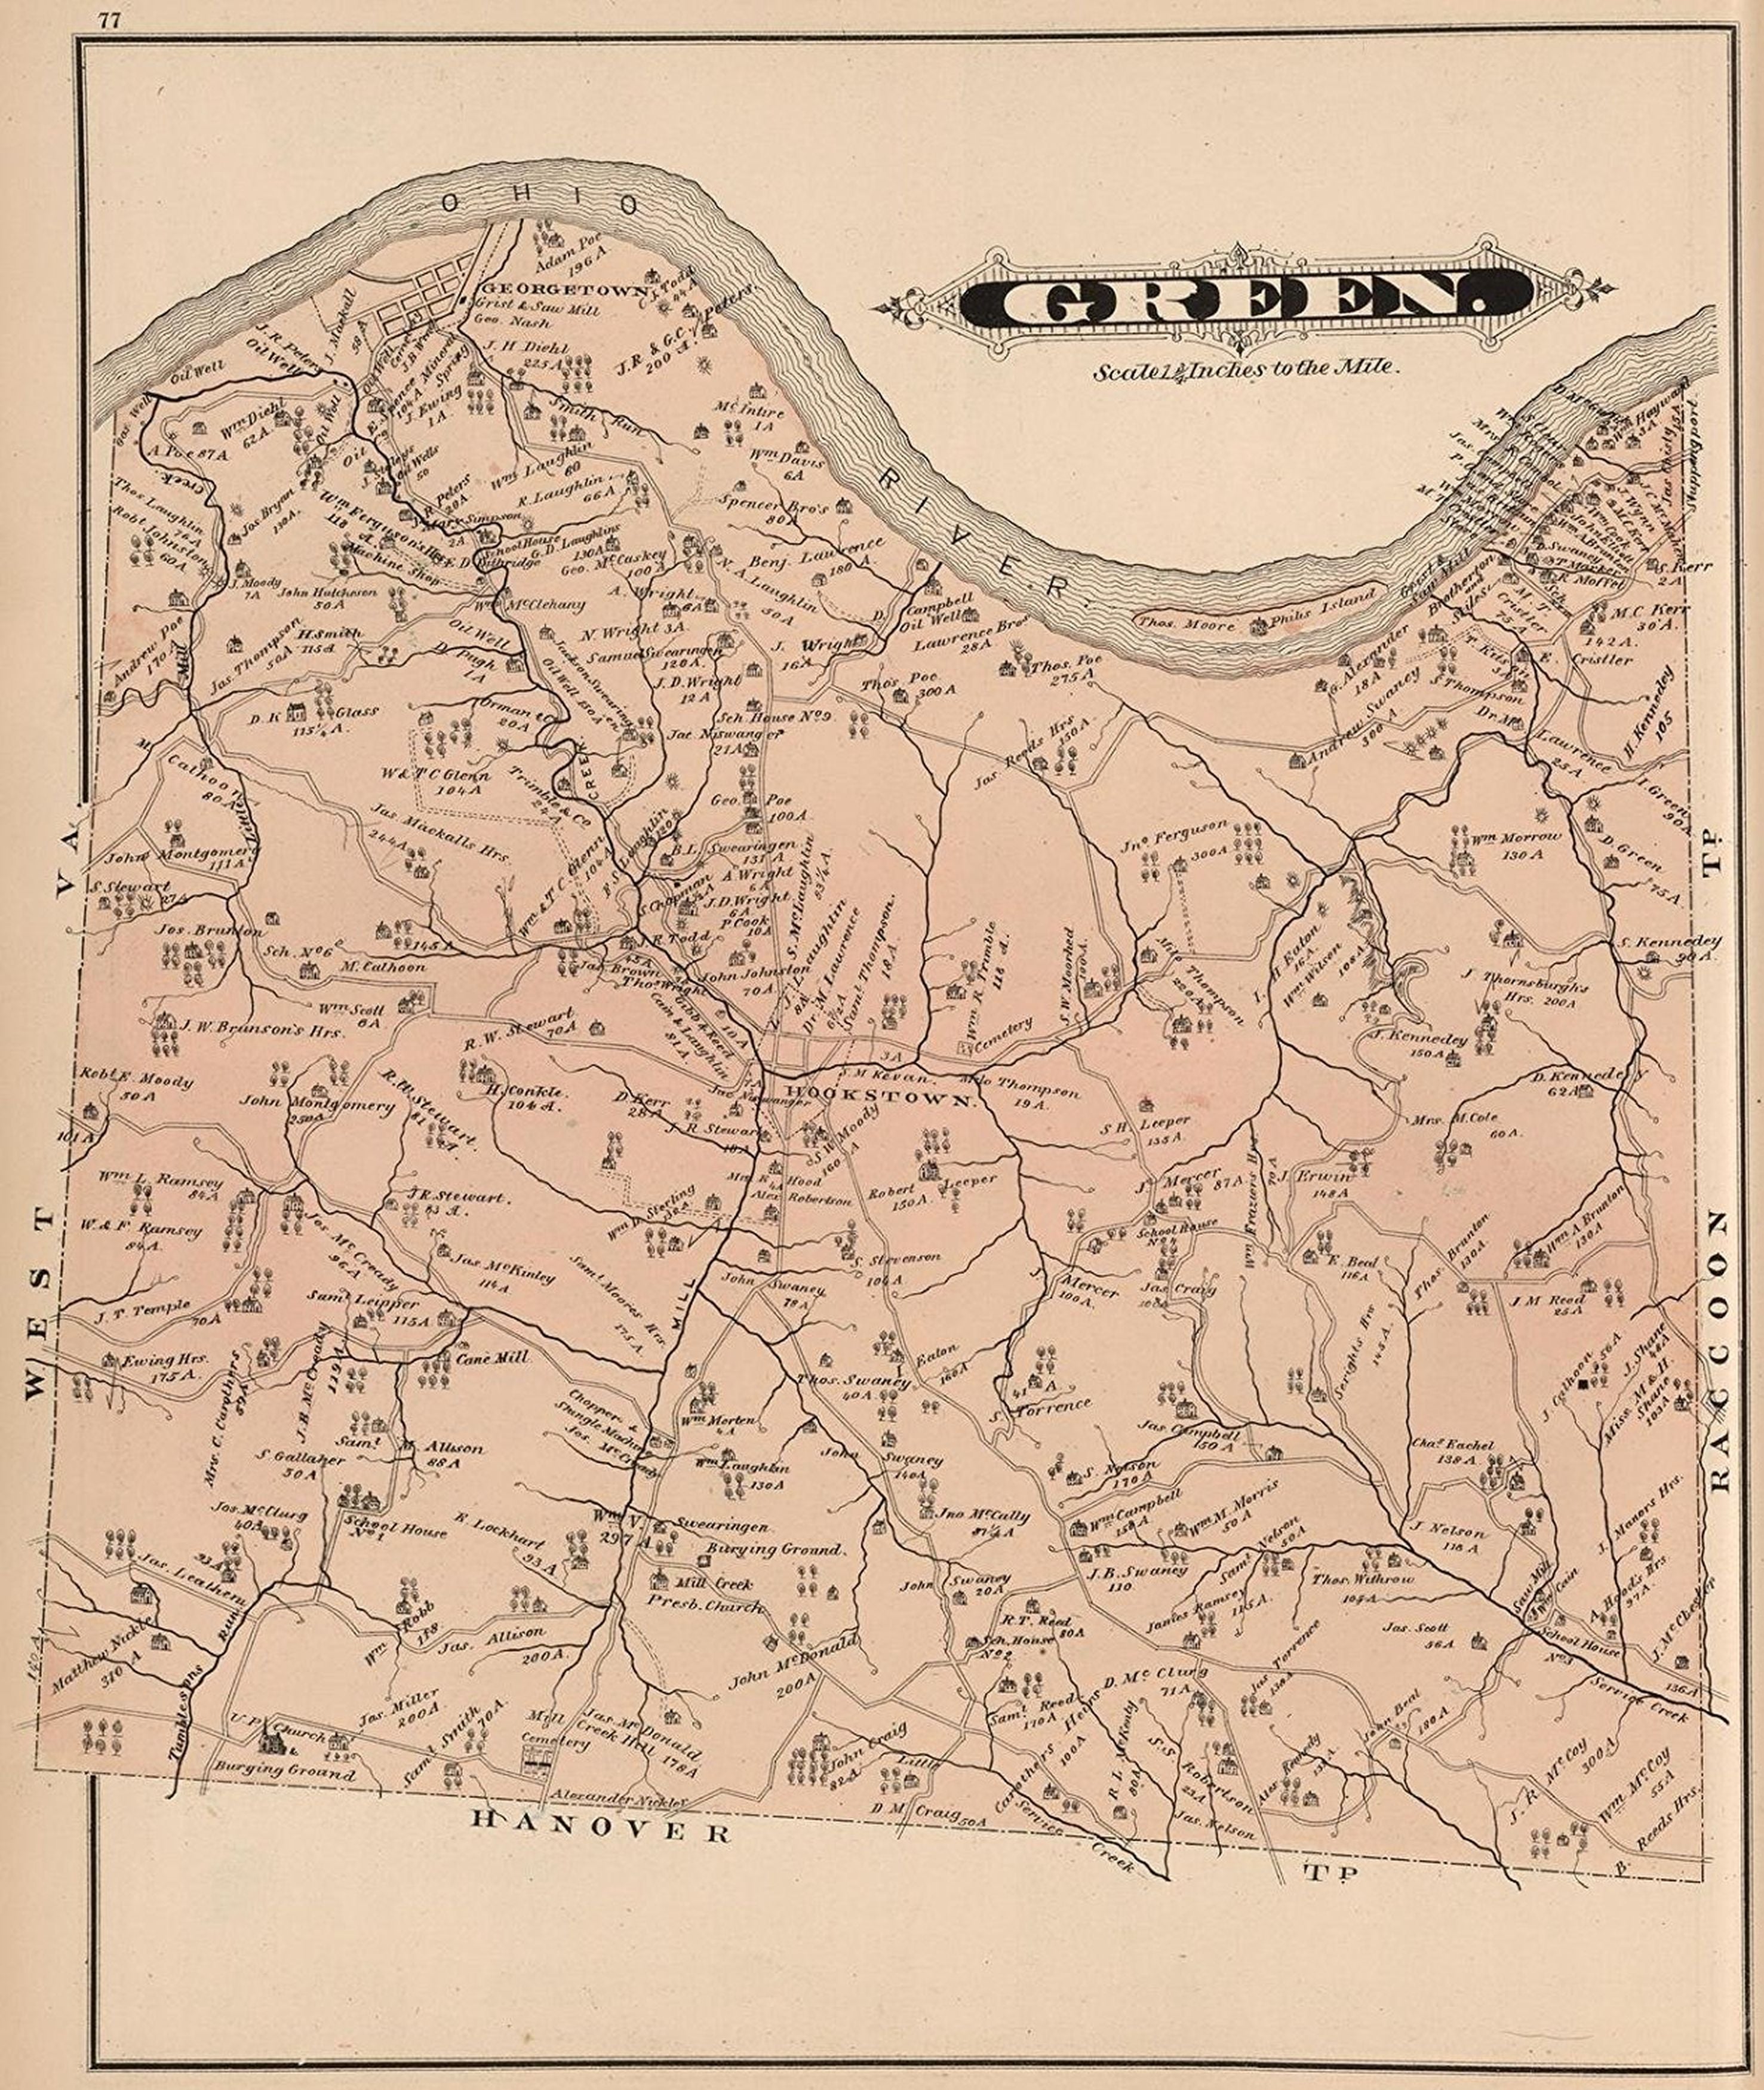 Green(e). (to accompany) Caldwell's Illustrated, Historical, Centennial Atlas Of Beaver County, Pennsylvania. From actual Surveys by and under the directions of J.A. Caldwell. Assisted by C.T. Arms, Sr. C.E. J.A. Underwood, C.E. J.A. Howden. P.L. Mason.